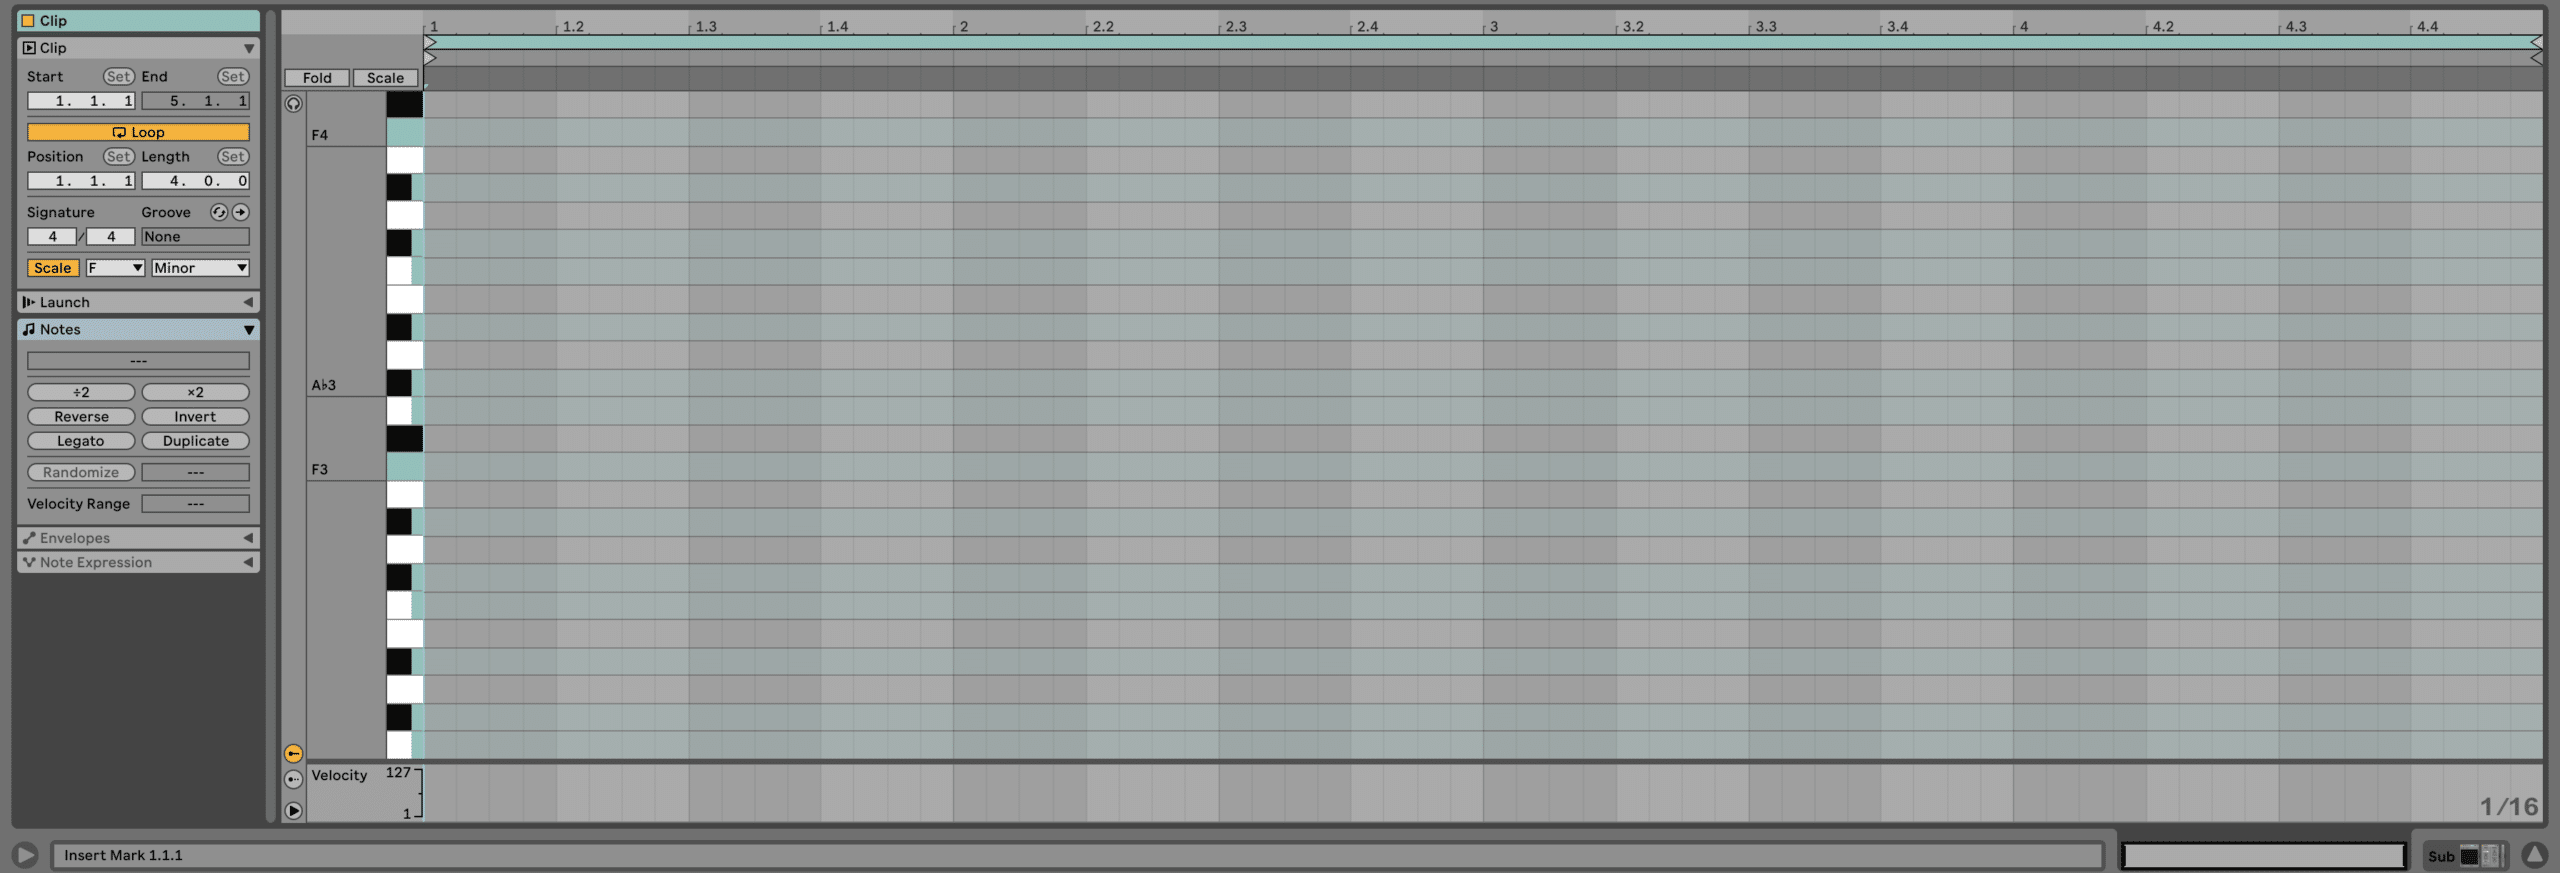 Enabling the F Minor scale for liquid drum and bass